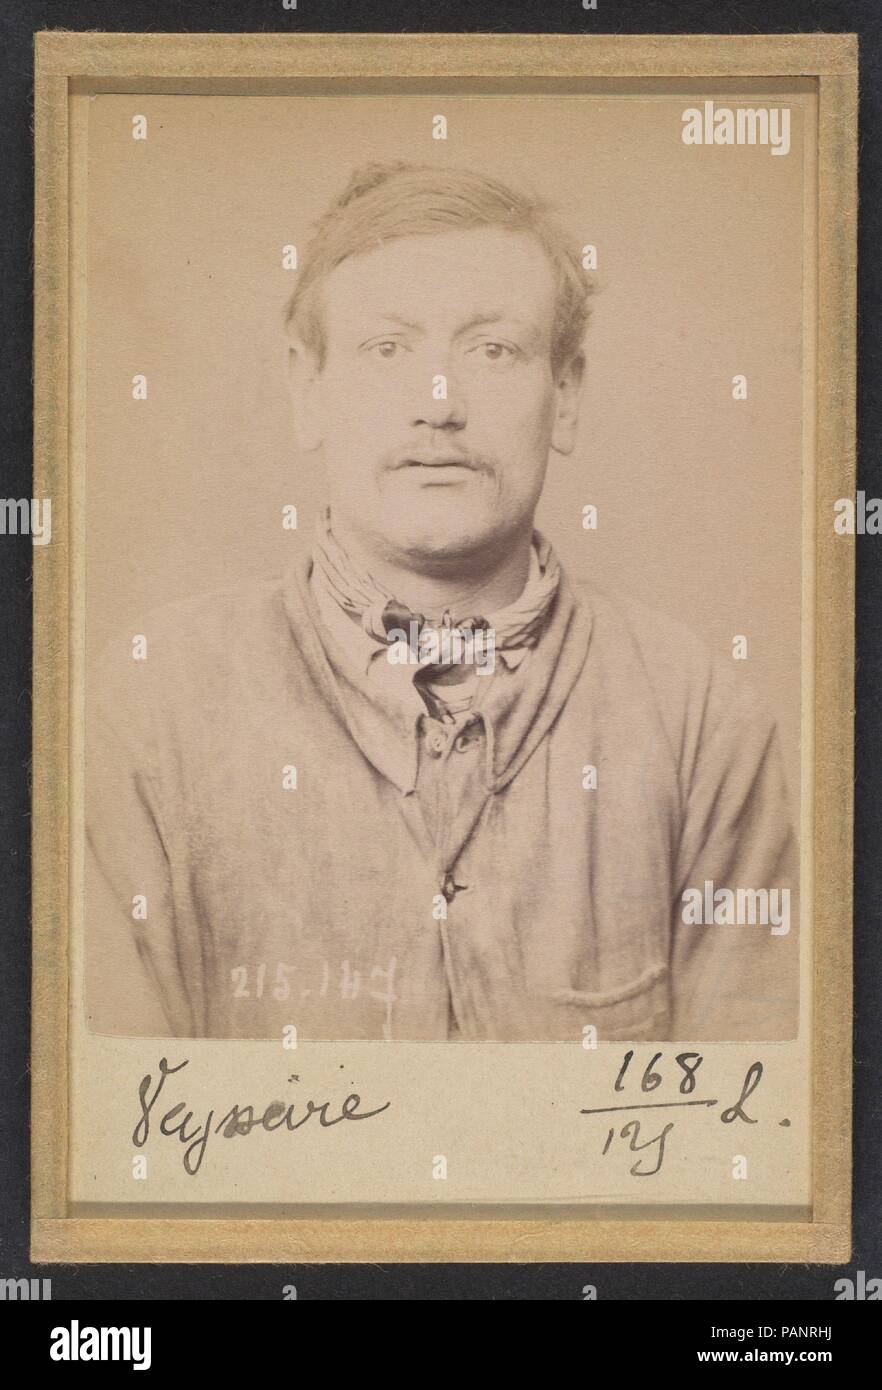 Veysseire. Michel. 25 ans, né à Montreuil. Journaliste. Anarchiste. 5/3/94. Artist: Alphonse Bertillon (French, 1853-1914). Dimensions: 10.5 x 7 x 0.5 cm (4 1/8 x 2 3/4 x 3/16 in.) each. Date: 1894.  Born into a distinguished family of scientists and statisticians, Bertillon began his career as a clerk in the Identification Bureau of the Paris Prefecture of Police in 1879. Tasked with maintaining reliable police records of offenders, he developed the first modern system of criminal identification. The system, which became known as Bertillonage, had three components: anthropometric measurement, Stock Photo